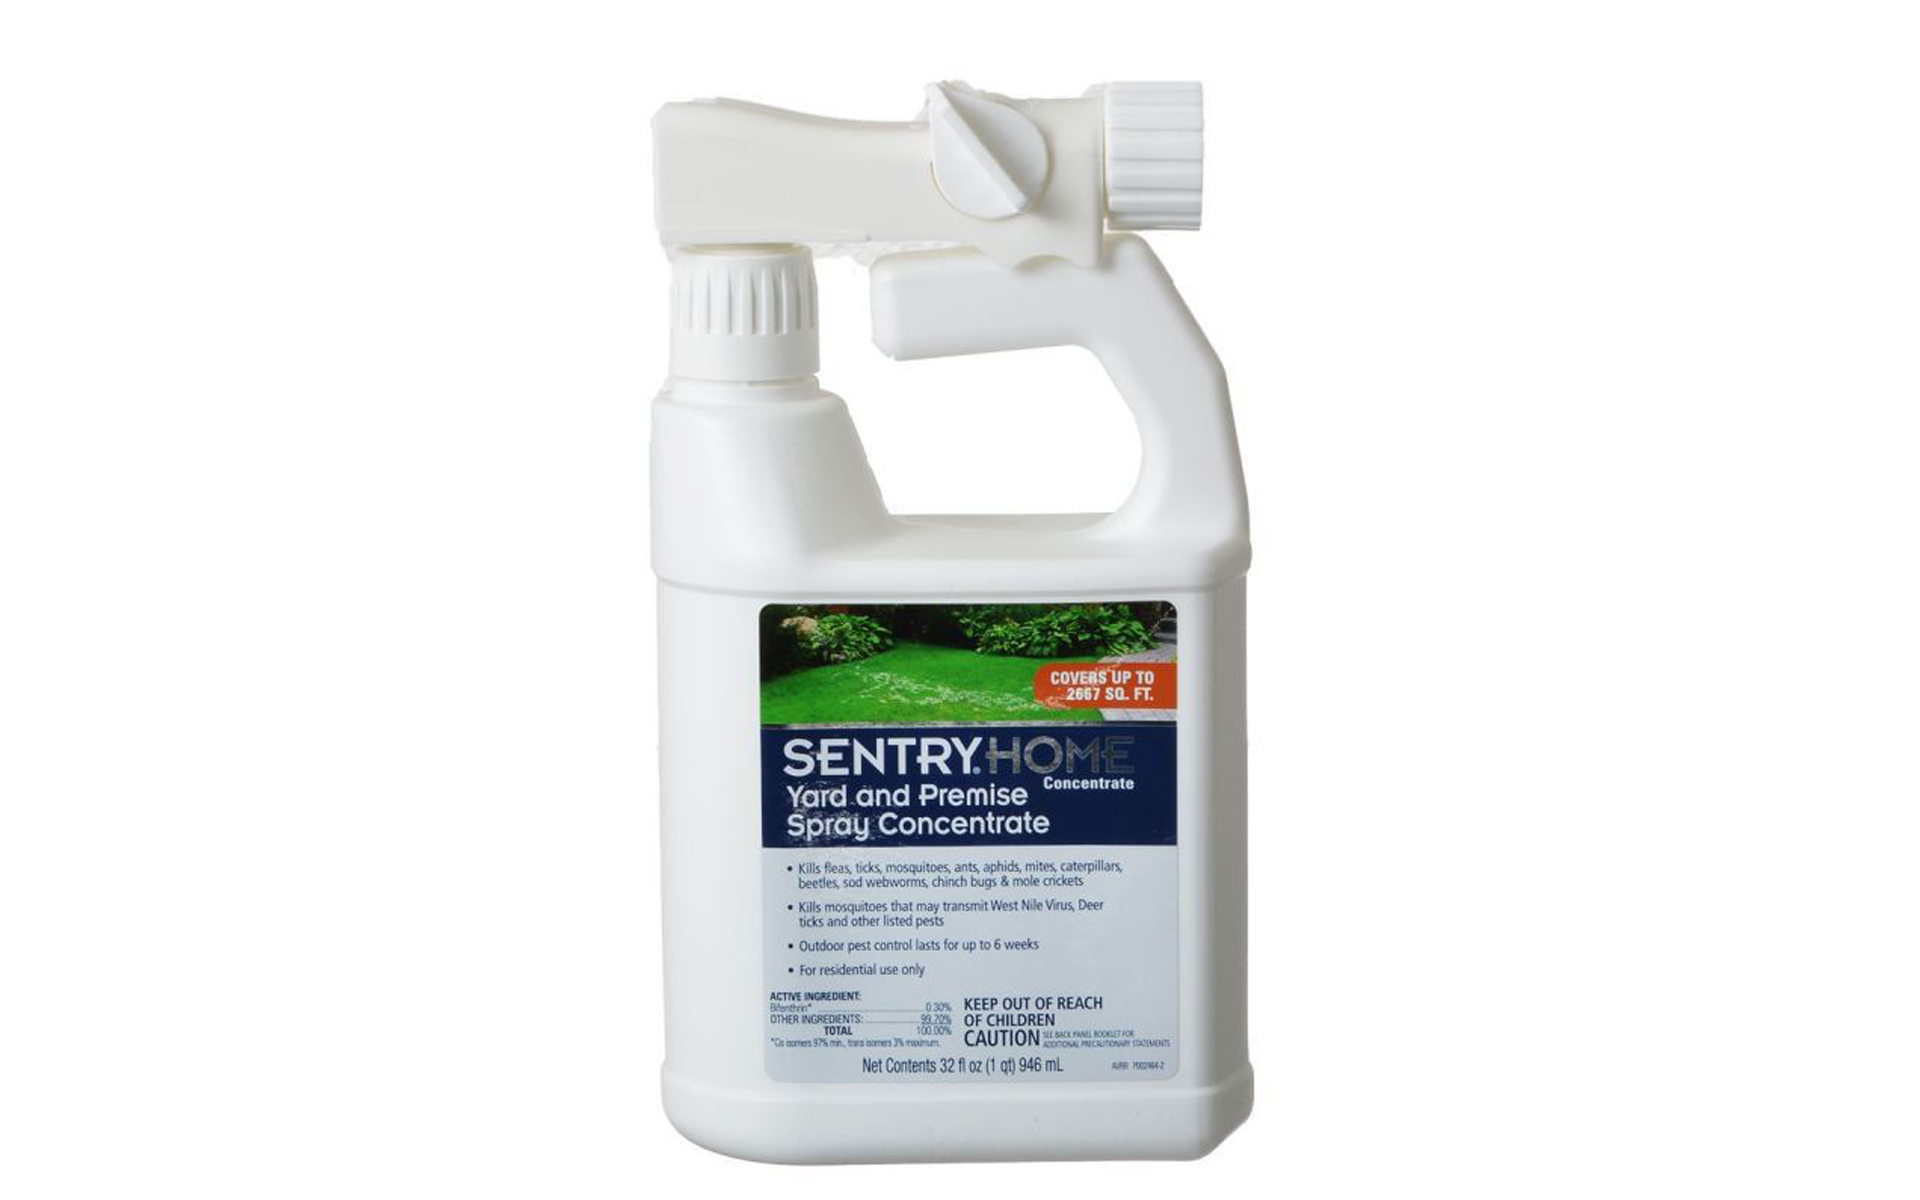 Home Yard & Premise Insect Spray Concentrate